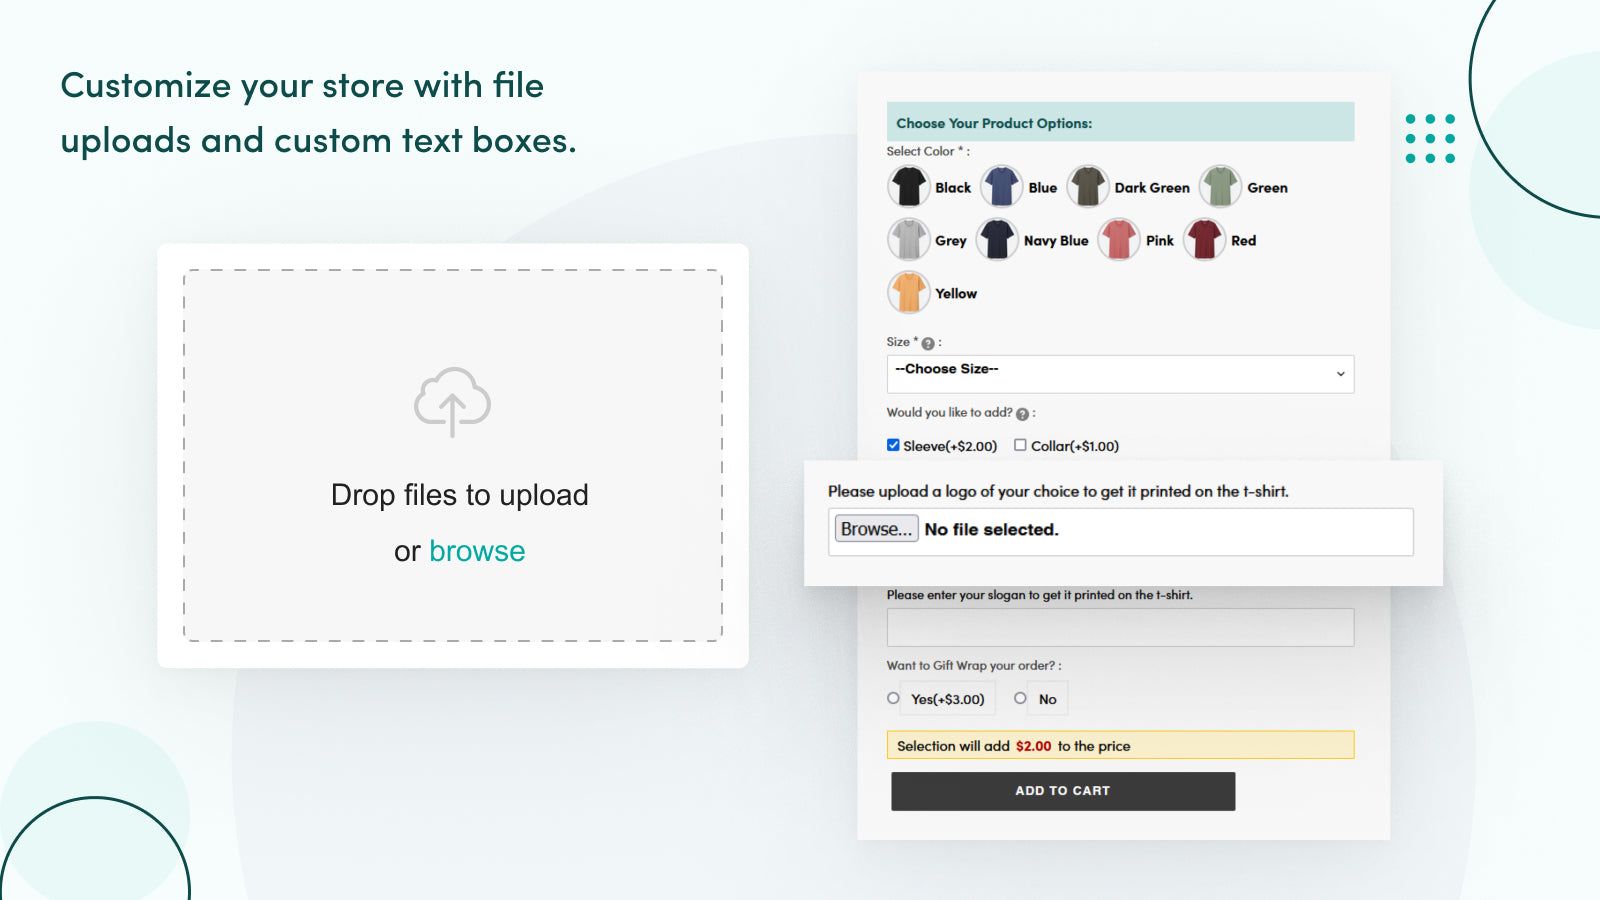 Use file uploads and custom text boxes to customize your store.